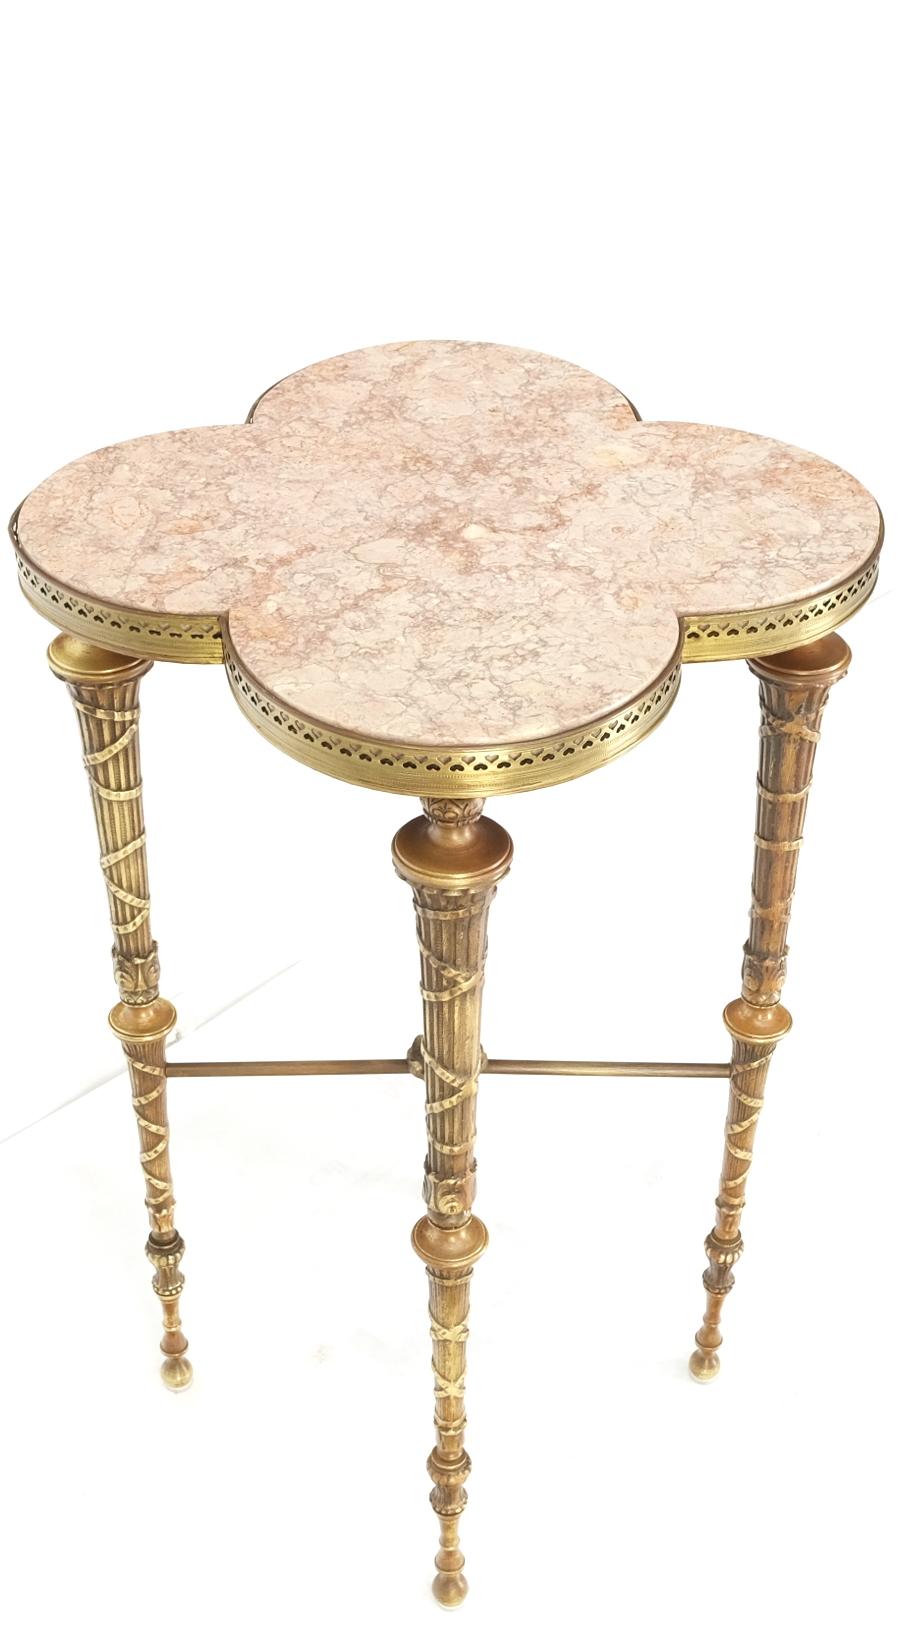 Exception Clover Shape Pink Marble Top Fluted Brass Legs Tall Pedestal Stand For Sale 6